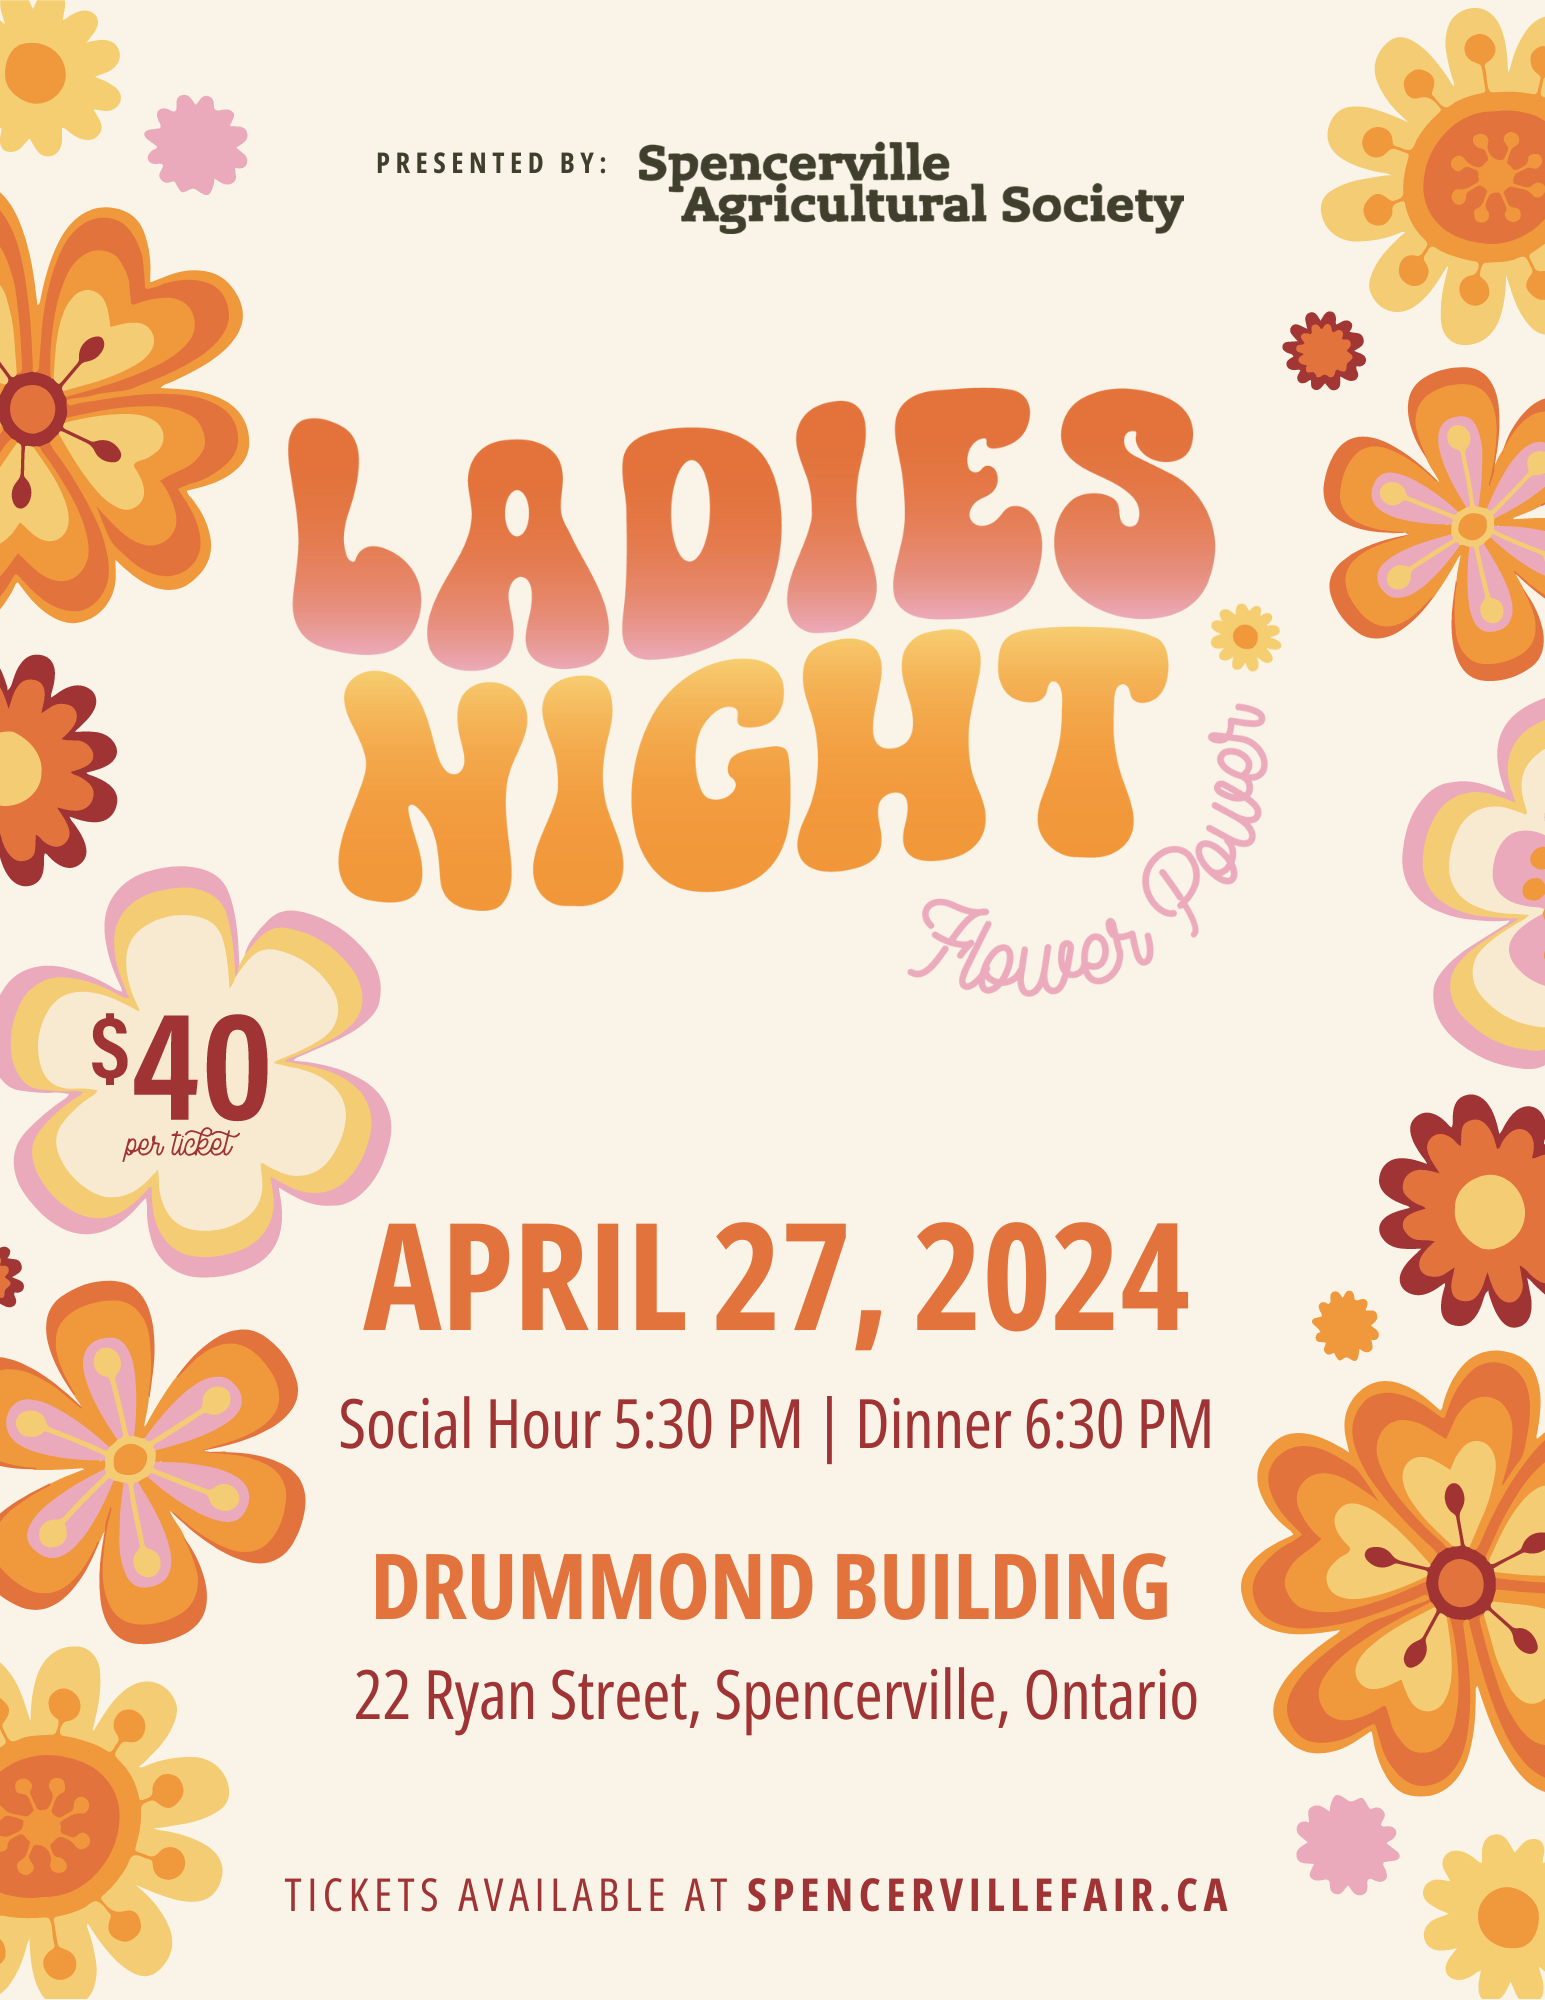 Spencerville Agricultural Society Ladies Night @ Drummond Building | Spencerville | Ontario | Canada